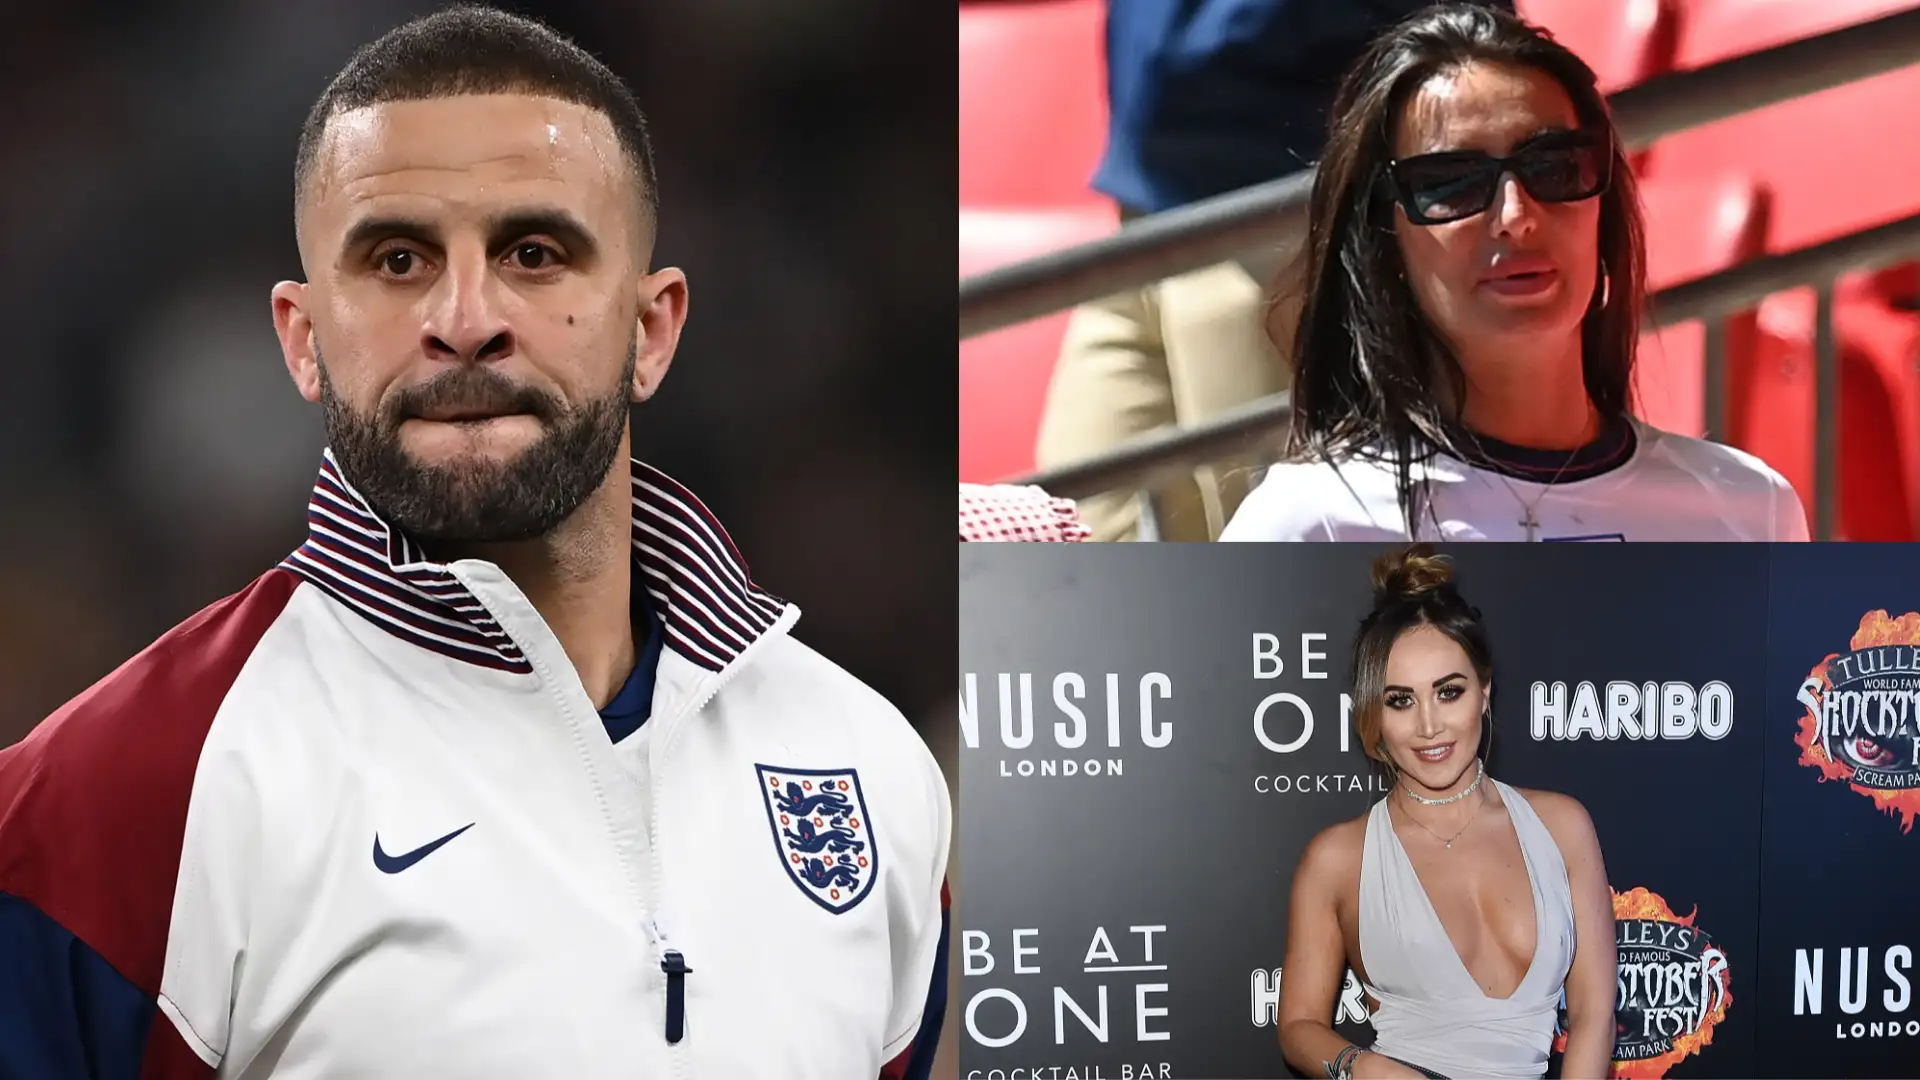 Kyle Walker's ex Lauryn Goodman dubbed 'a sensational signing' after being snapped up for new reality television show